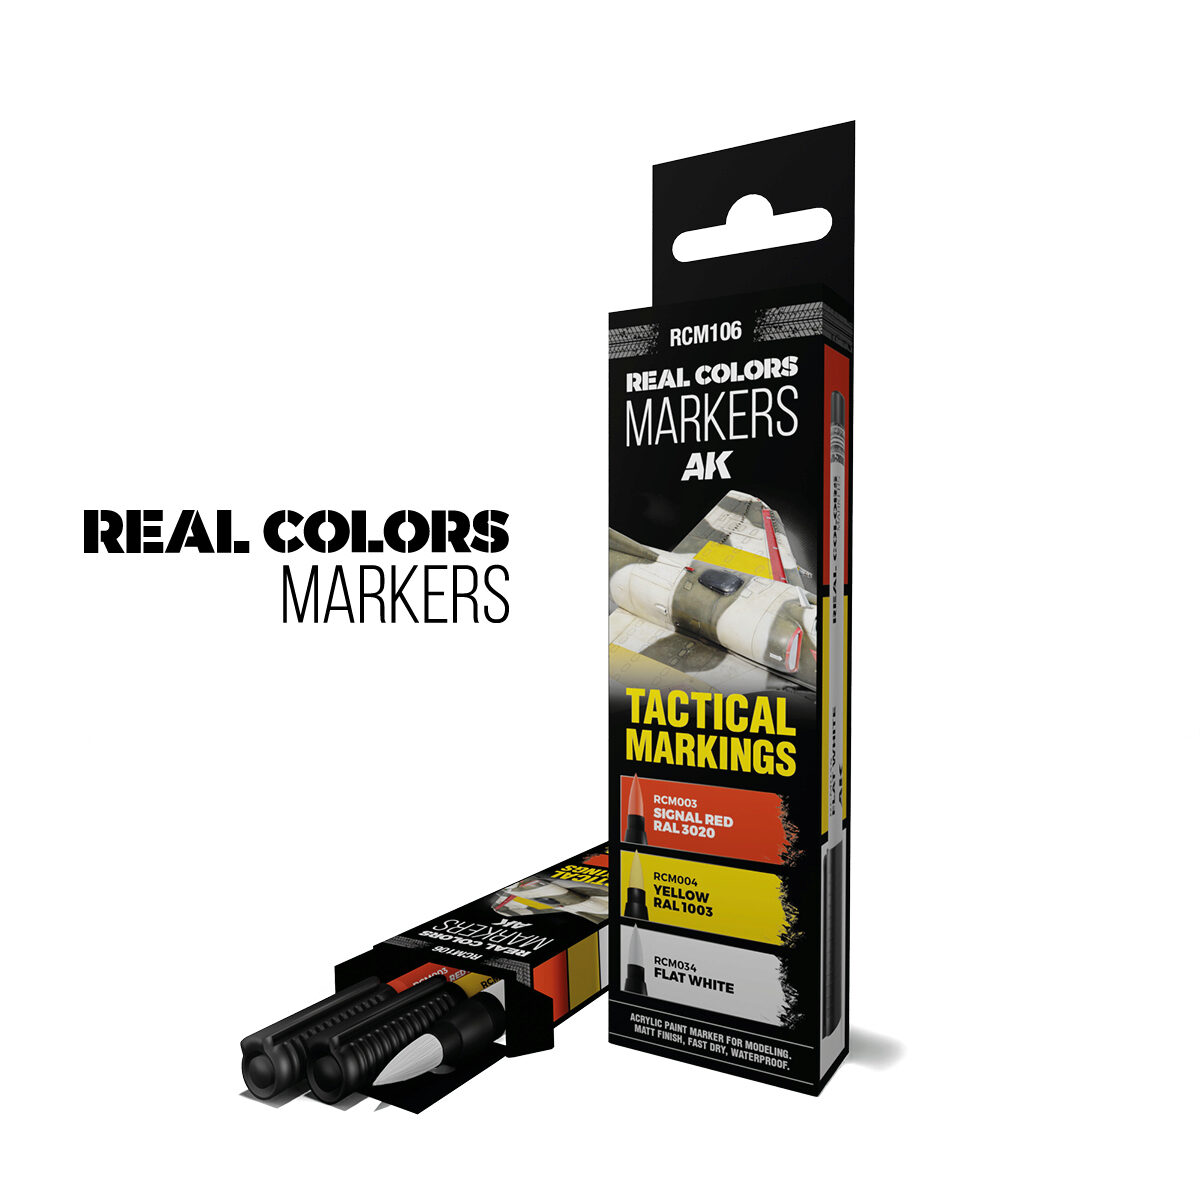 AK RCM106 TACTICAL MARKINGS - SET 3 REAL COLORS MARKERS